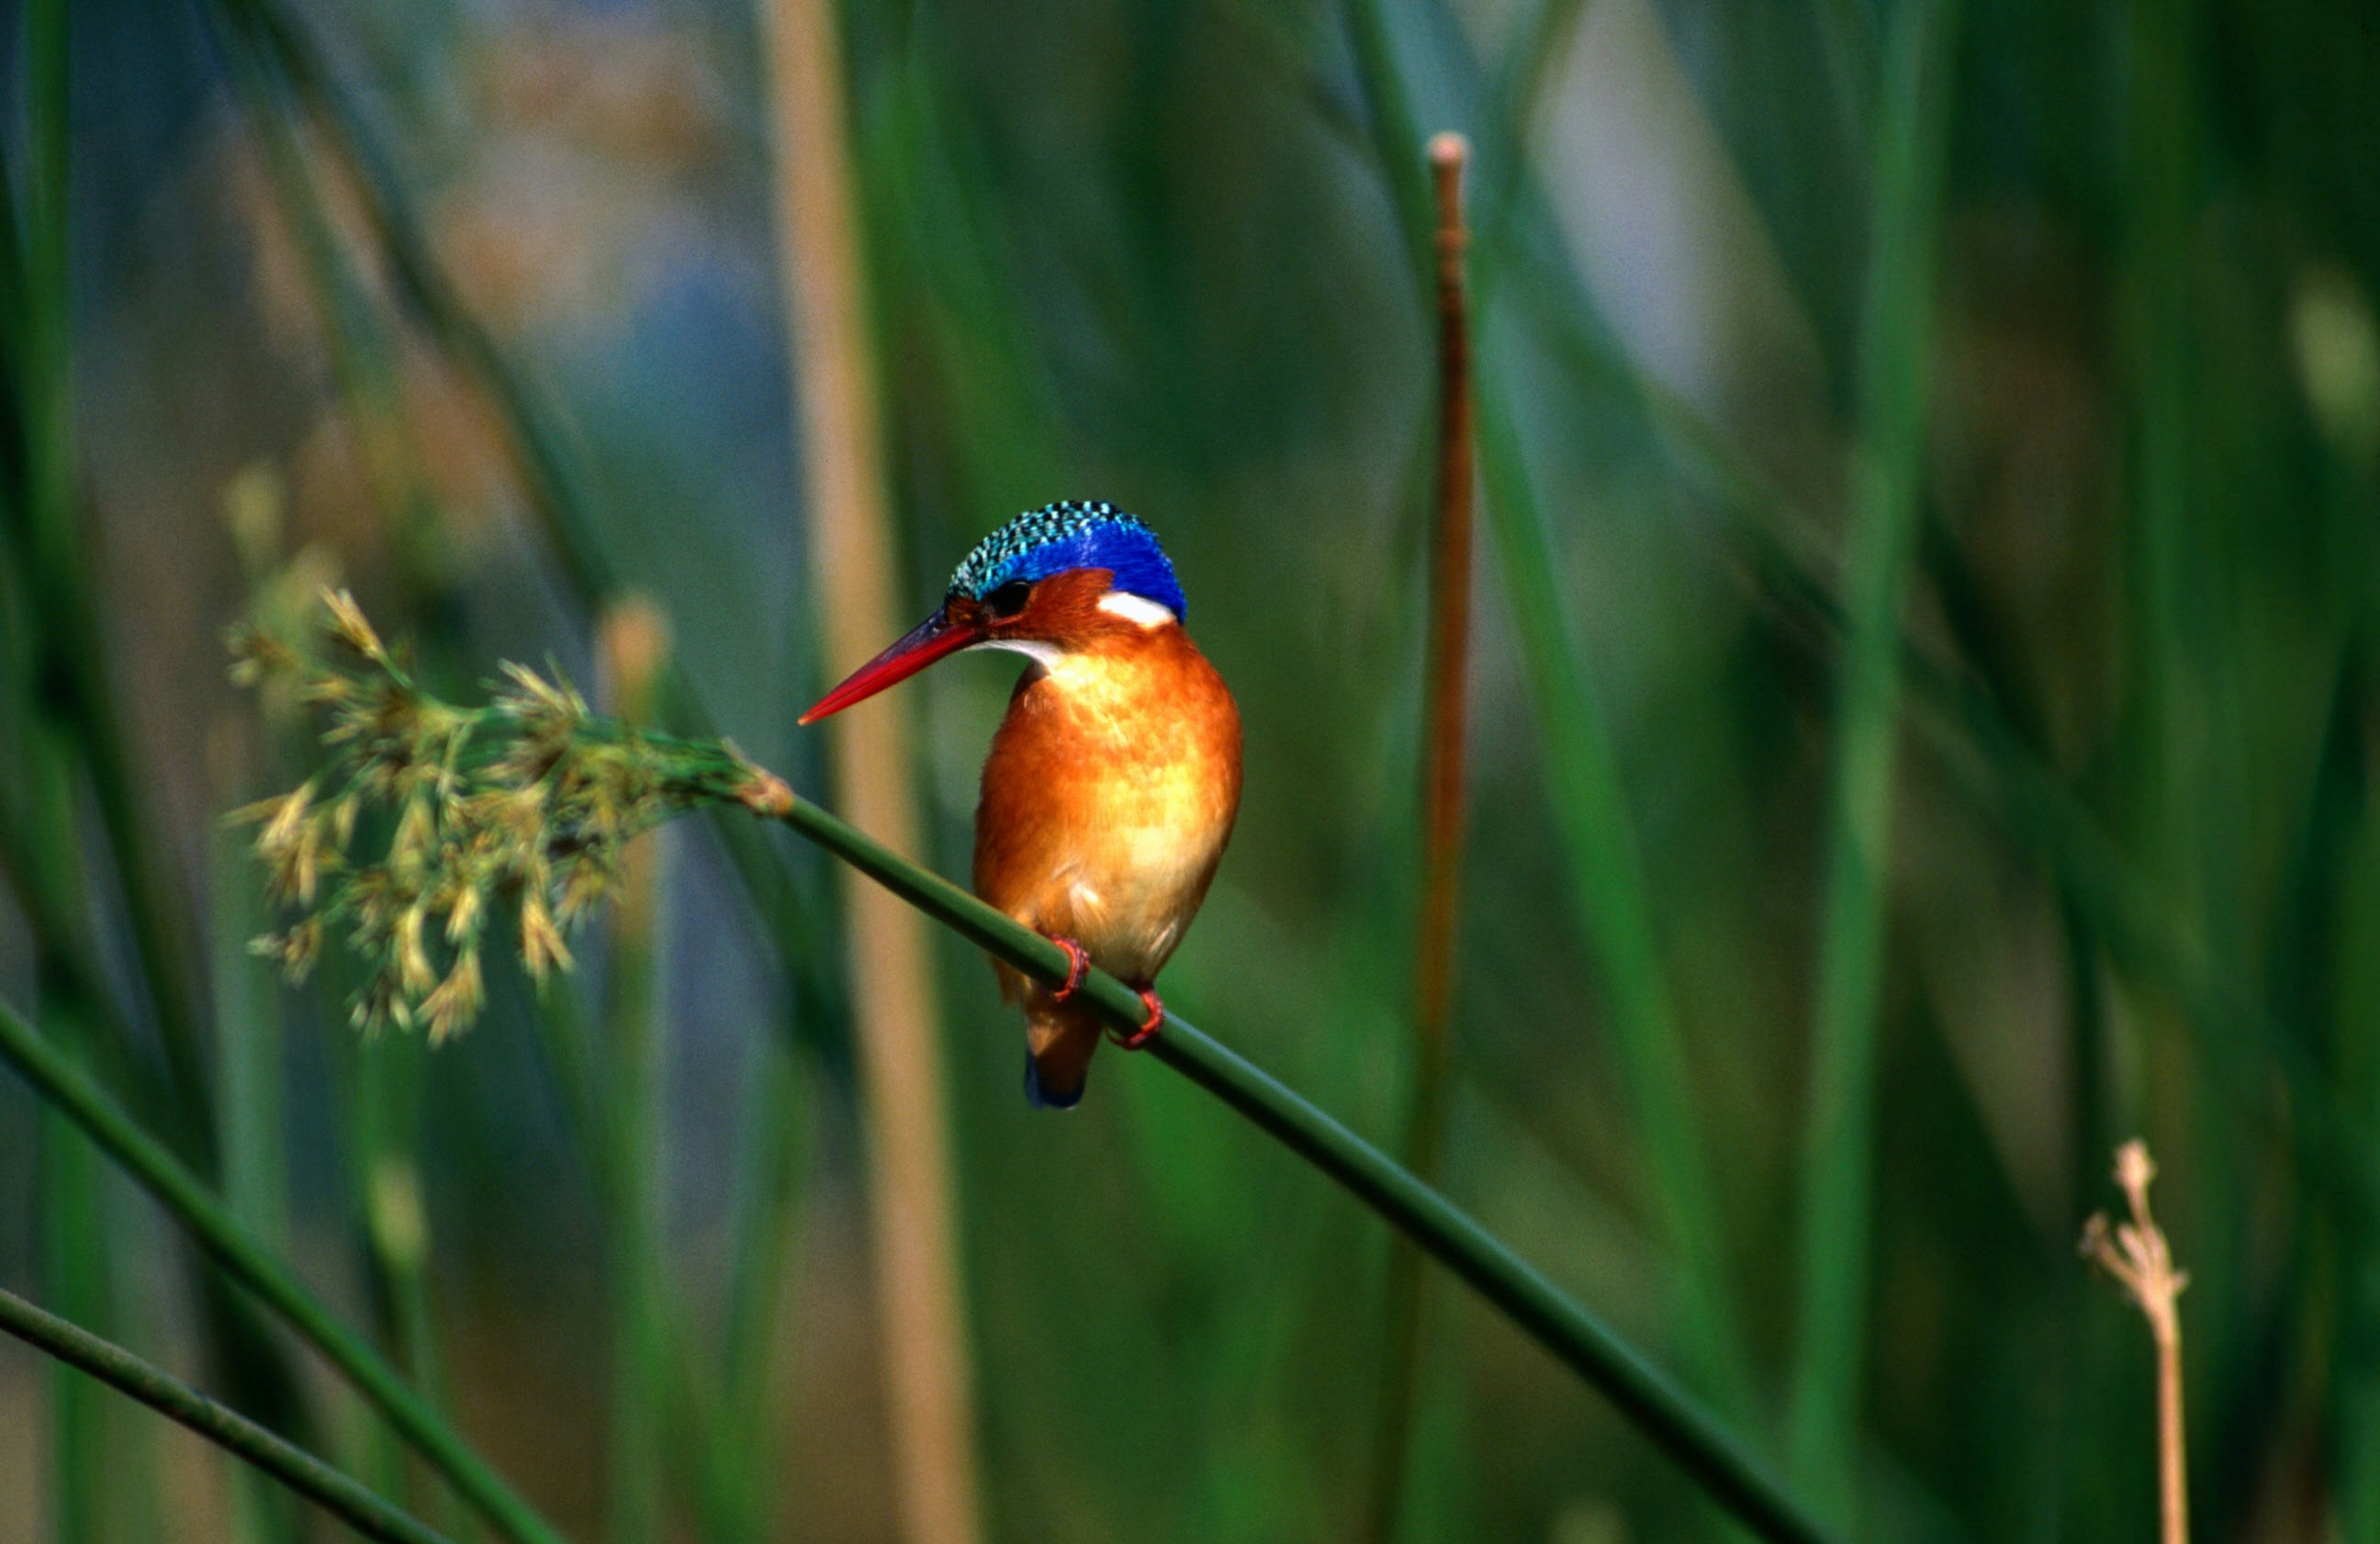 A malachite kingfisher stands on a reed in a wetland; its plumage is purple, black, malachite green and bright metallic blue, while its beak is bright orange